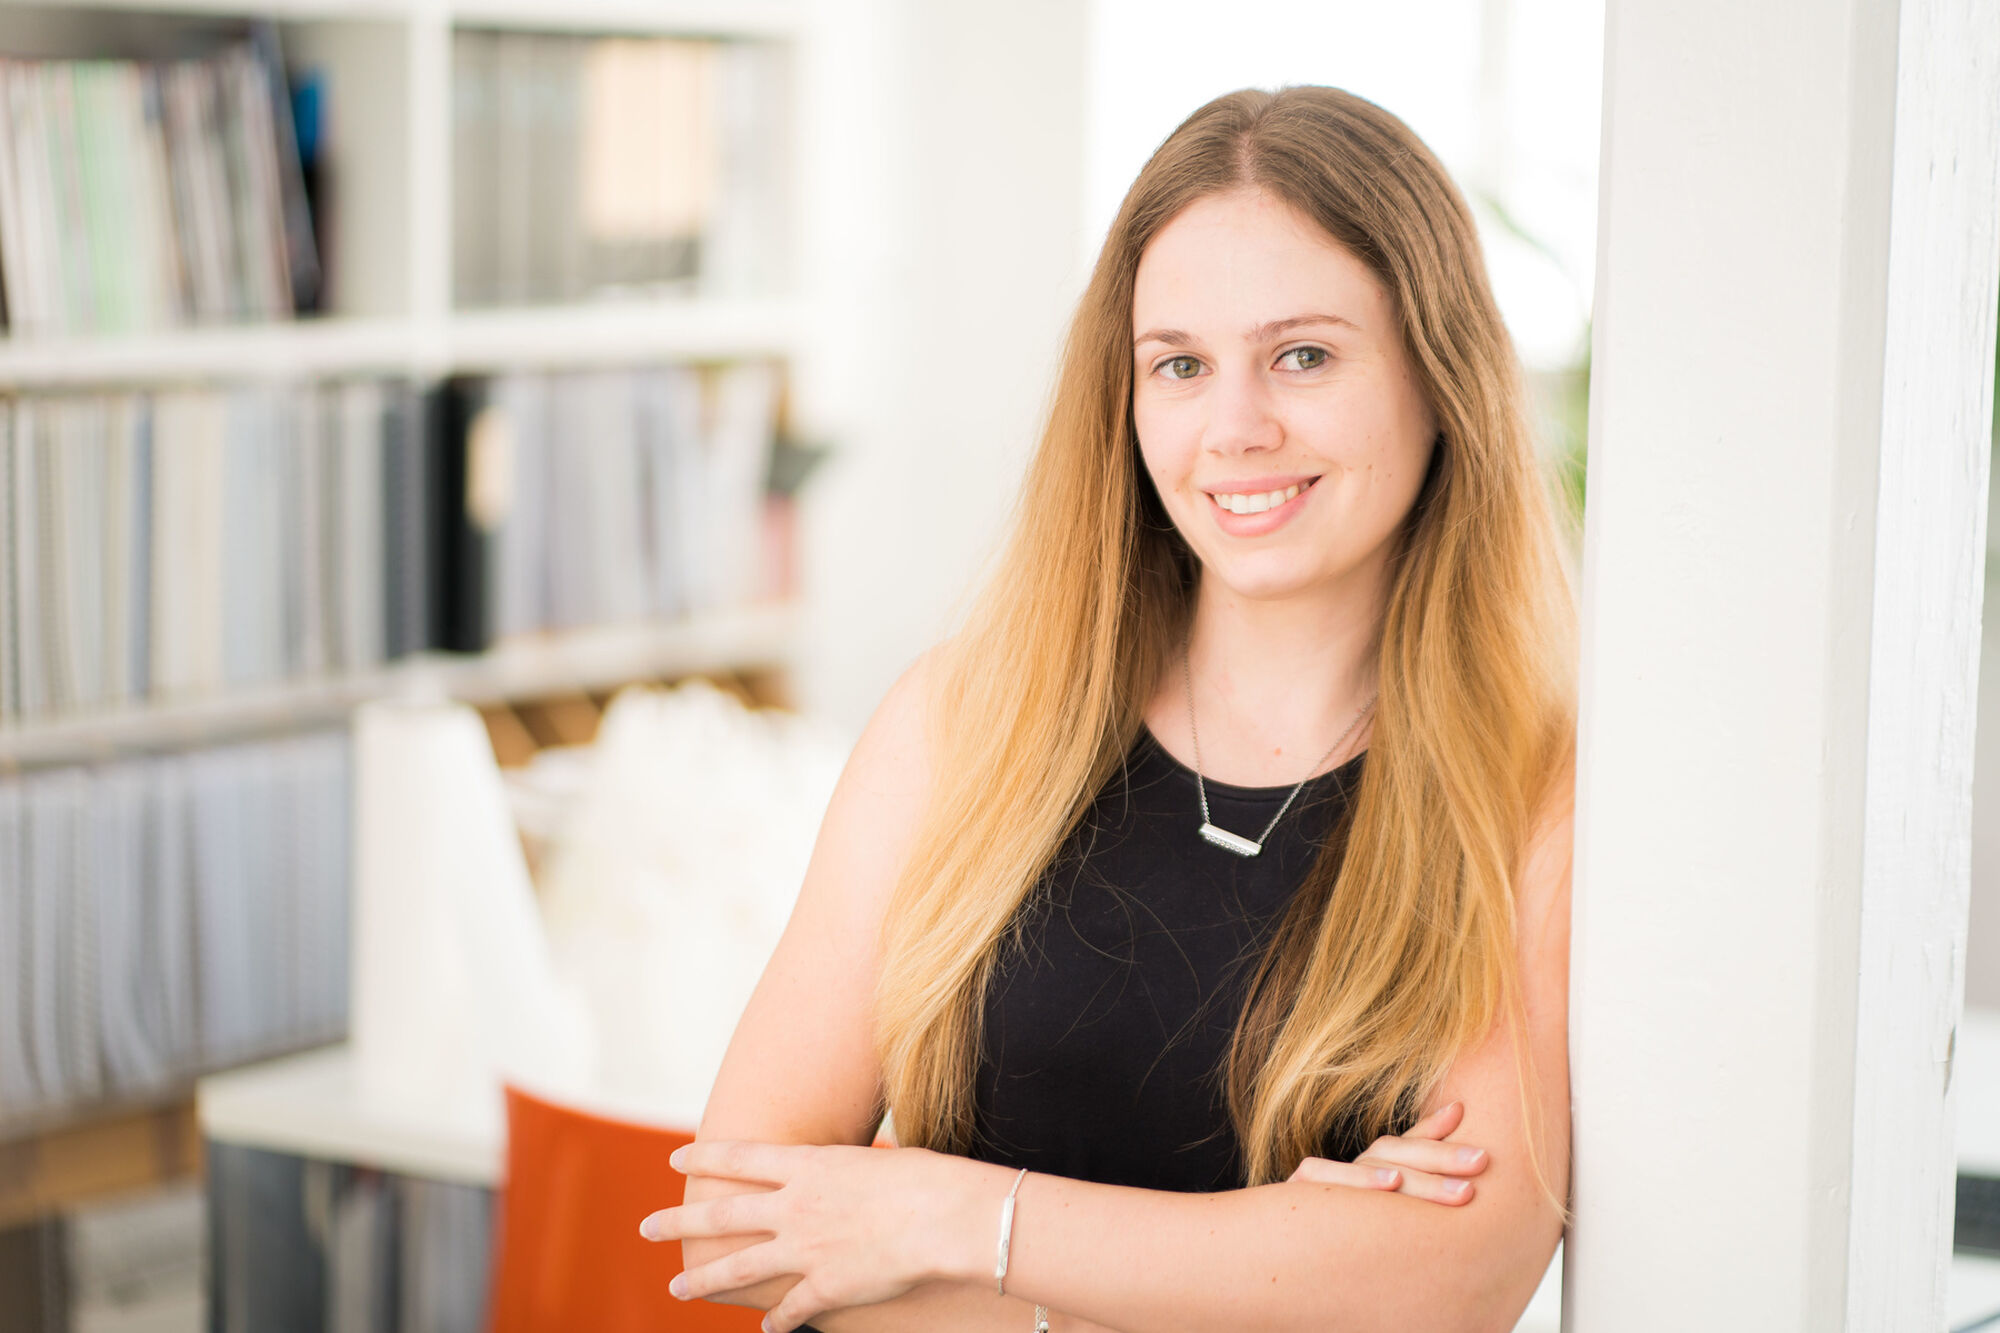 Our People: 5 minutes with Kyrstyn Oberholster, Associate at Grant Associates